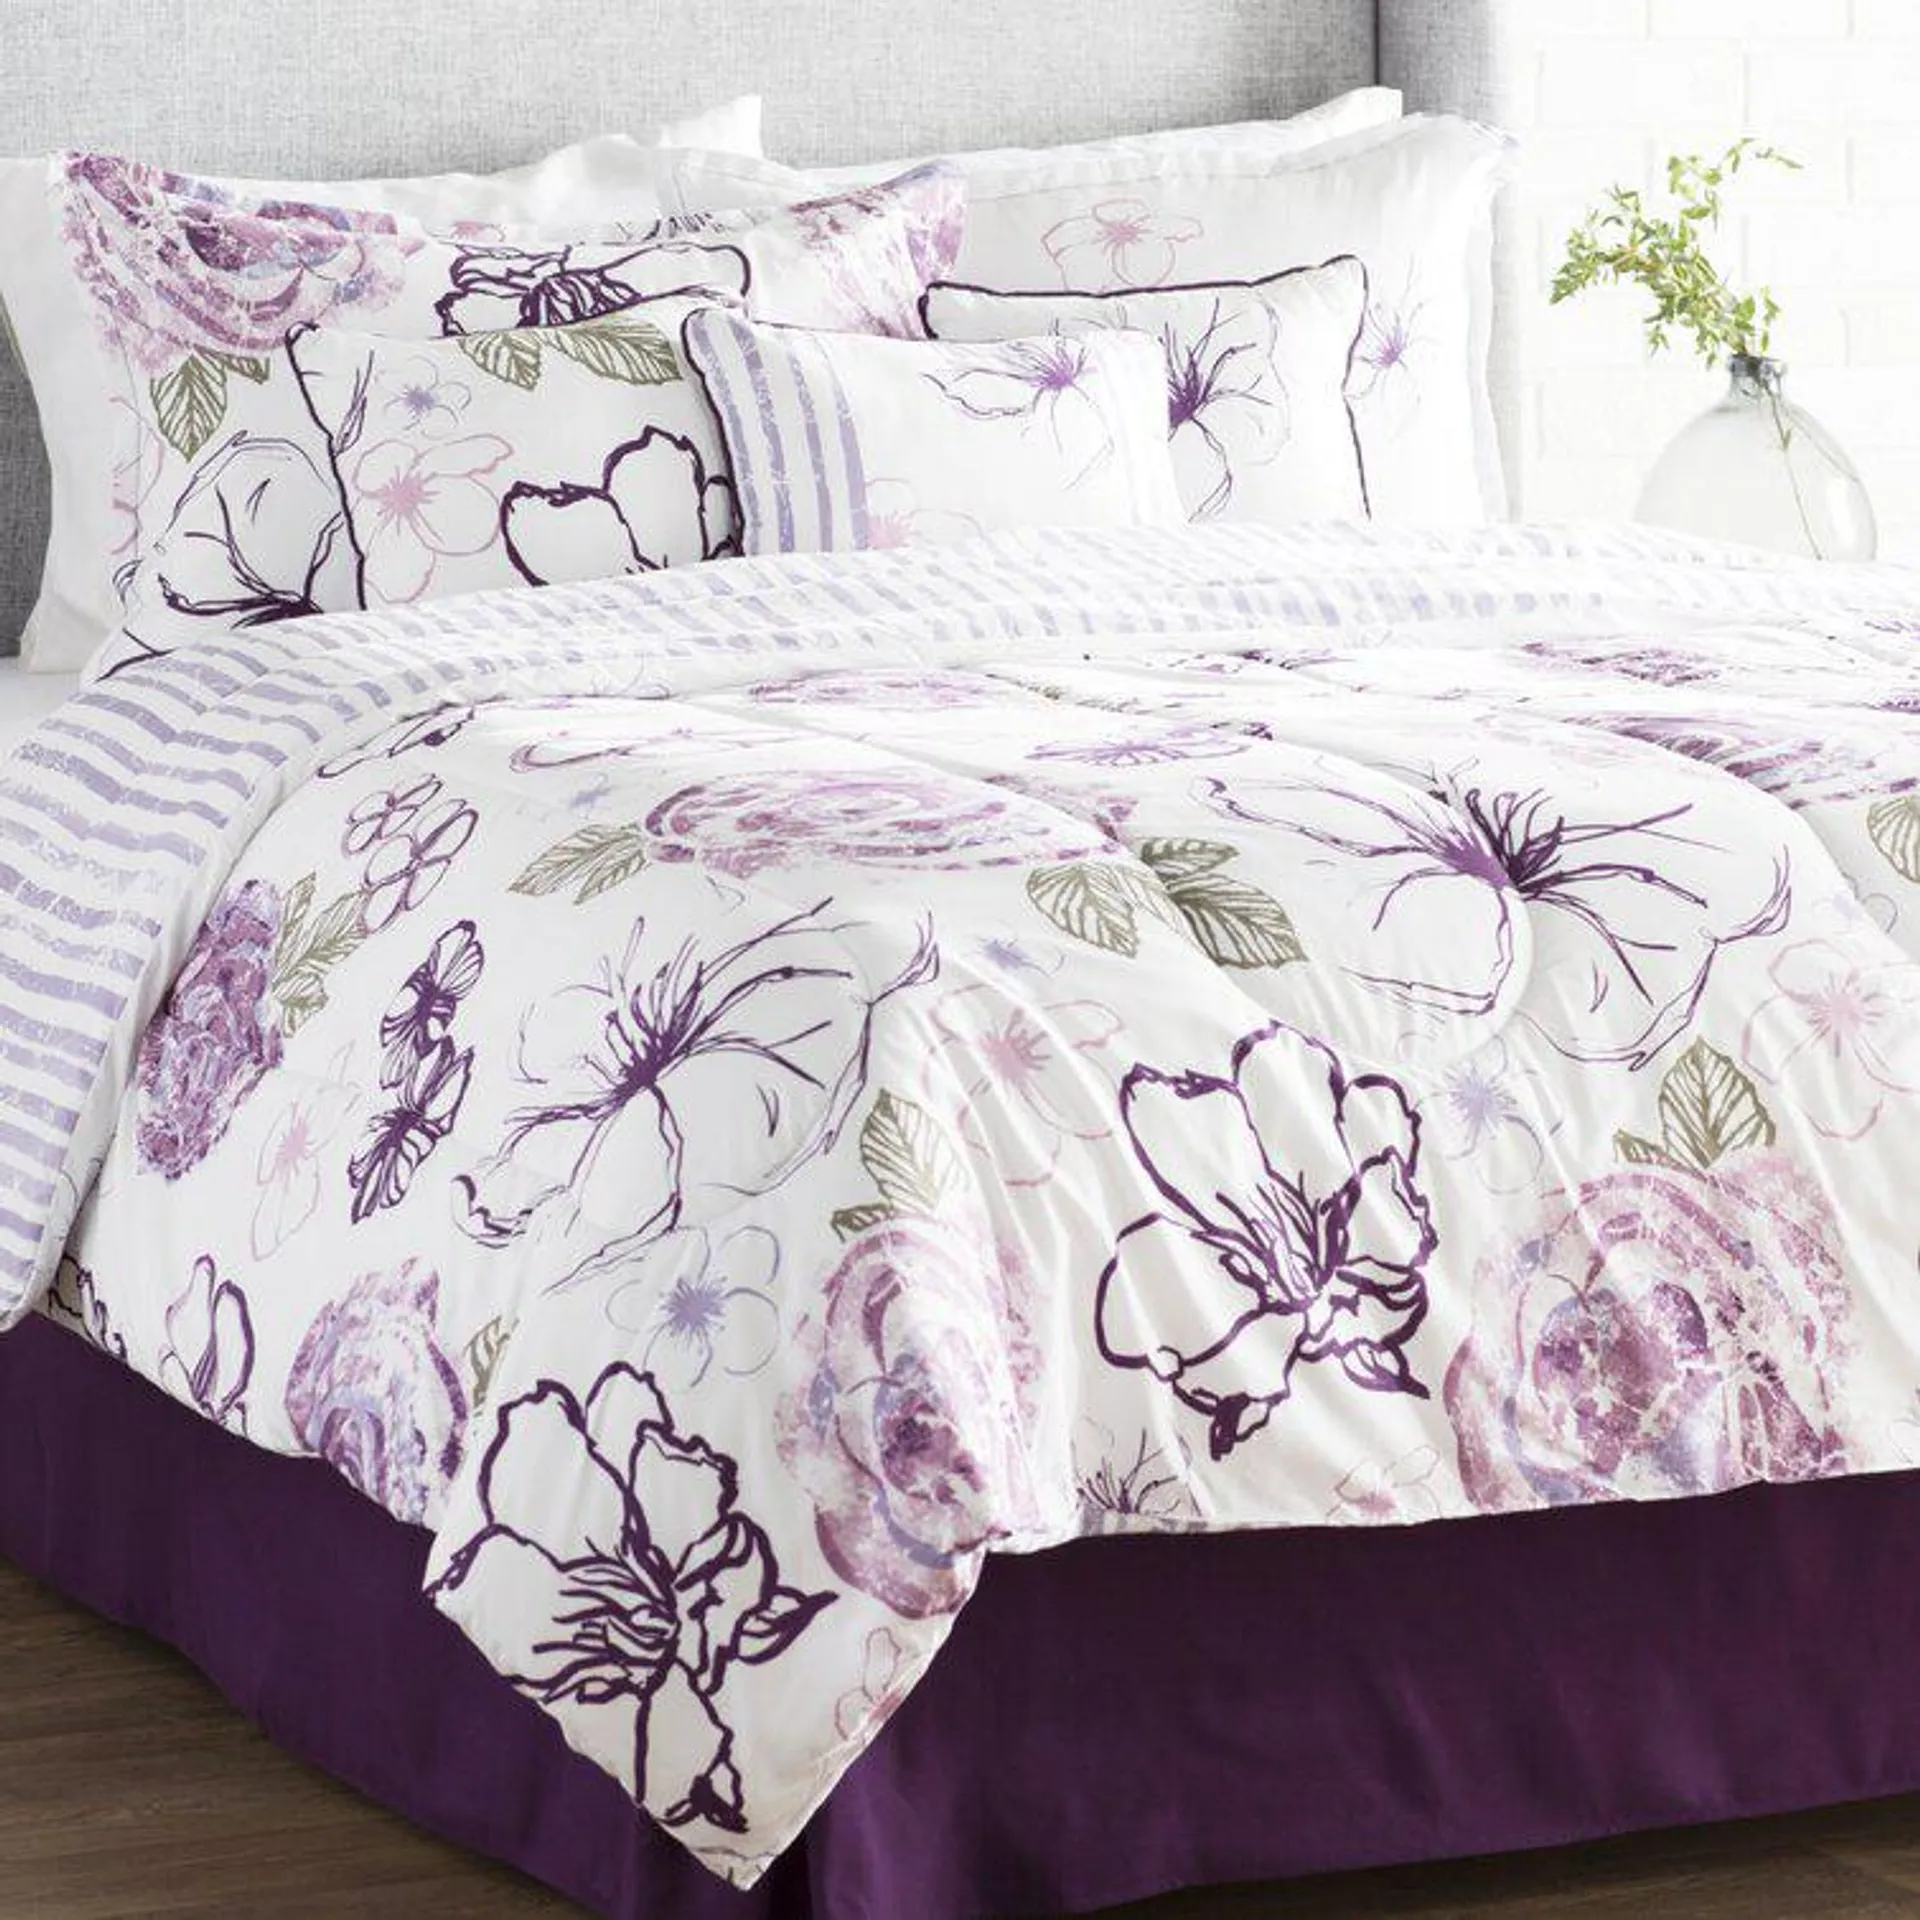 Ramsell Modern & Contemporary Floral Comforter Set